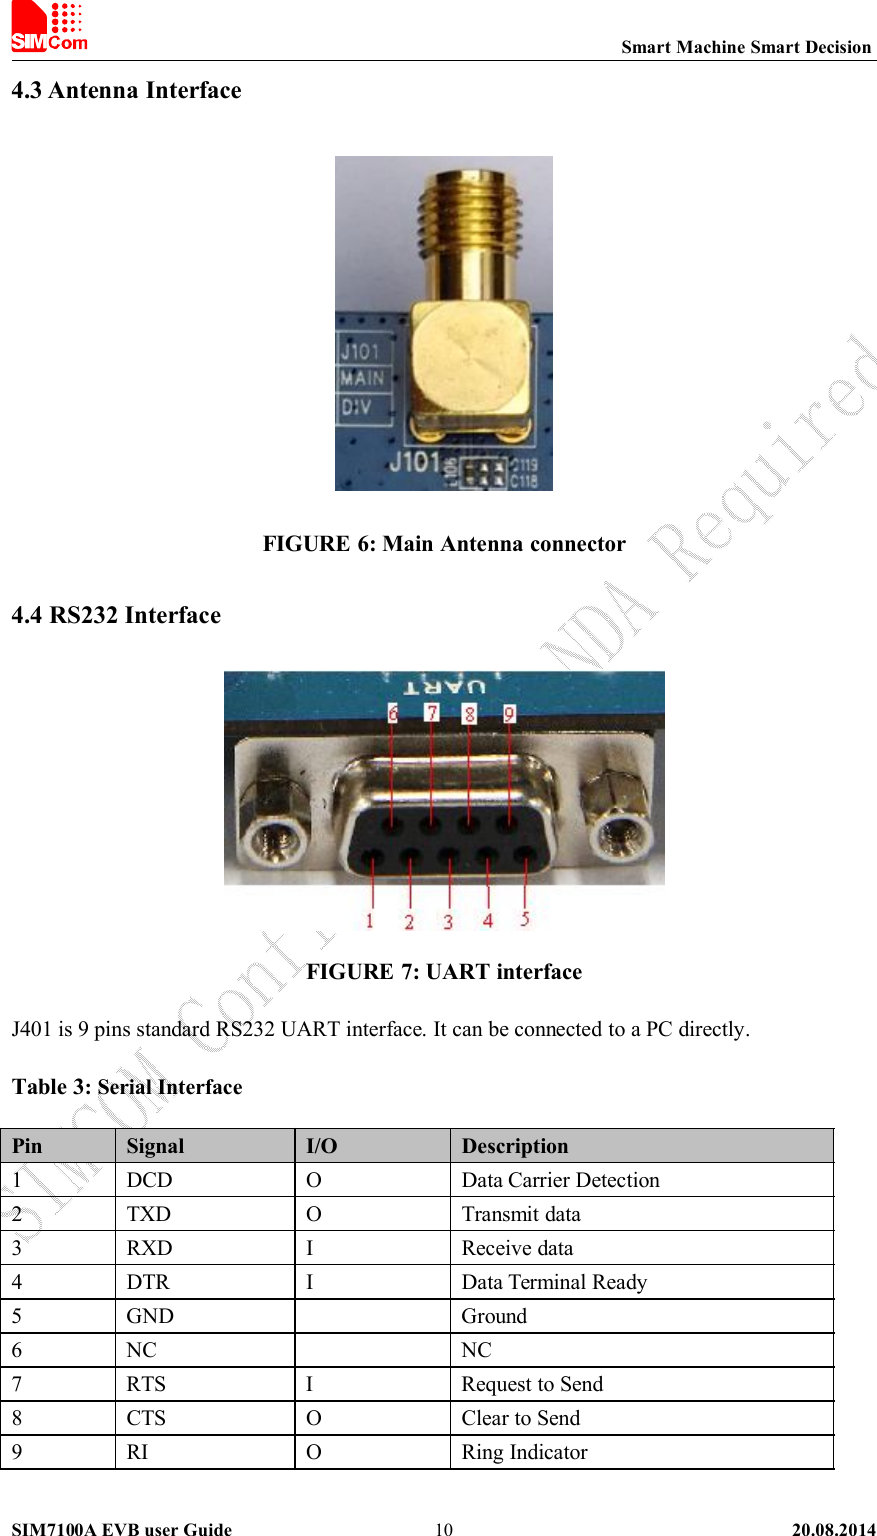 Smart Machine Smart DecisionSIM7100A EVB user Guide 20.08.2014104.3 Antenna InterfaceFIGURE 6: Main Antenna connector4.4 RS232 InterfaceFIGURE 7: UART interfaceJ401 is 9 pins standard RS232 UART interface. It can be connected to a PC directly.Table 3: Serial InterfacePin Signal I/O Description1 DCD O Data Carrier Detection2 TXD O Transmit data3 RXD I Receive data4 DTR I Data Terminal Ready5 GND Ground6 NC NC7 RTS I Request to Send8 CTS O Clear to Send9 RI O Ring Indicator